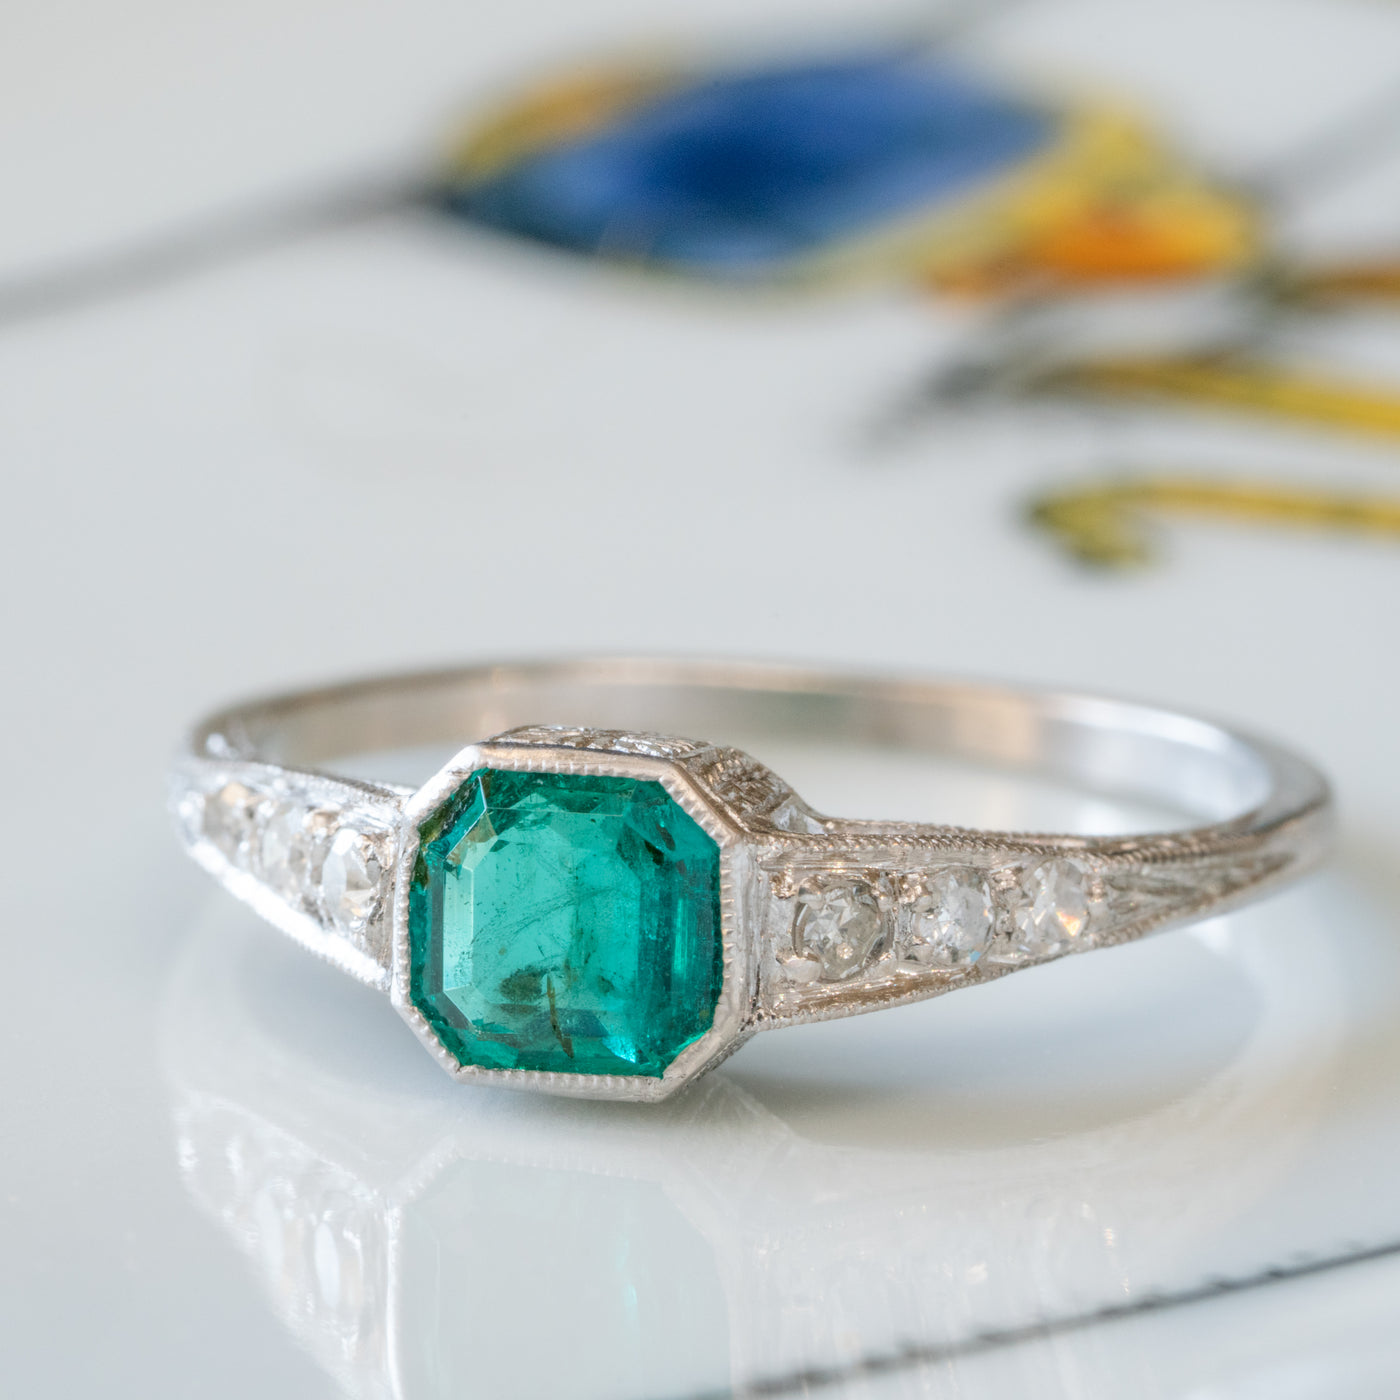 ART DECO PLATINUM AND 1.0 CTS. COLOMBIAN EMERALD AND DIAMOND RING c.1925